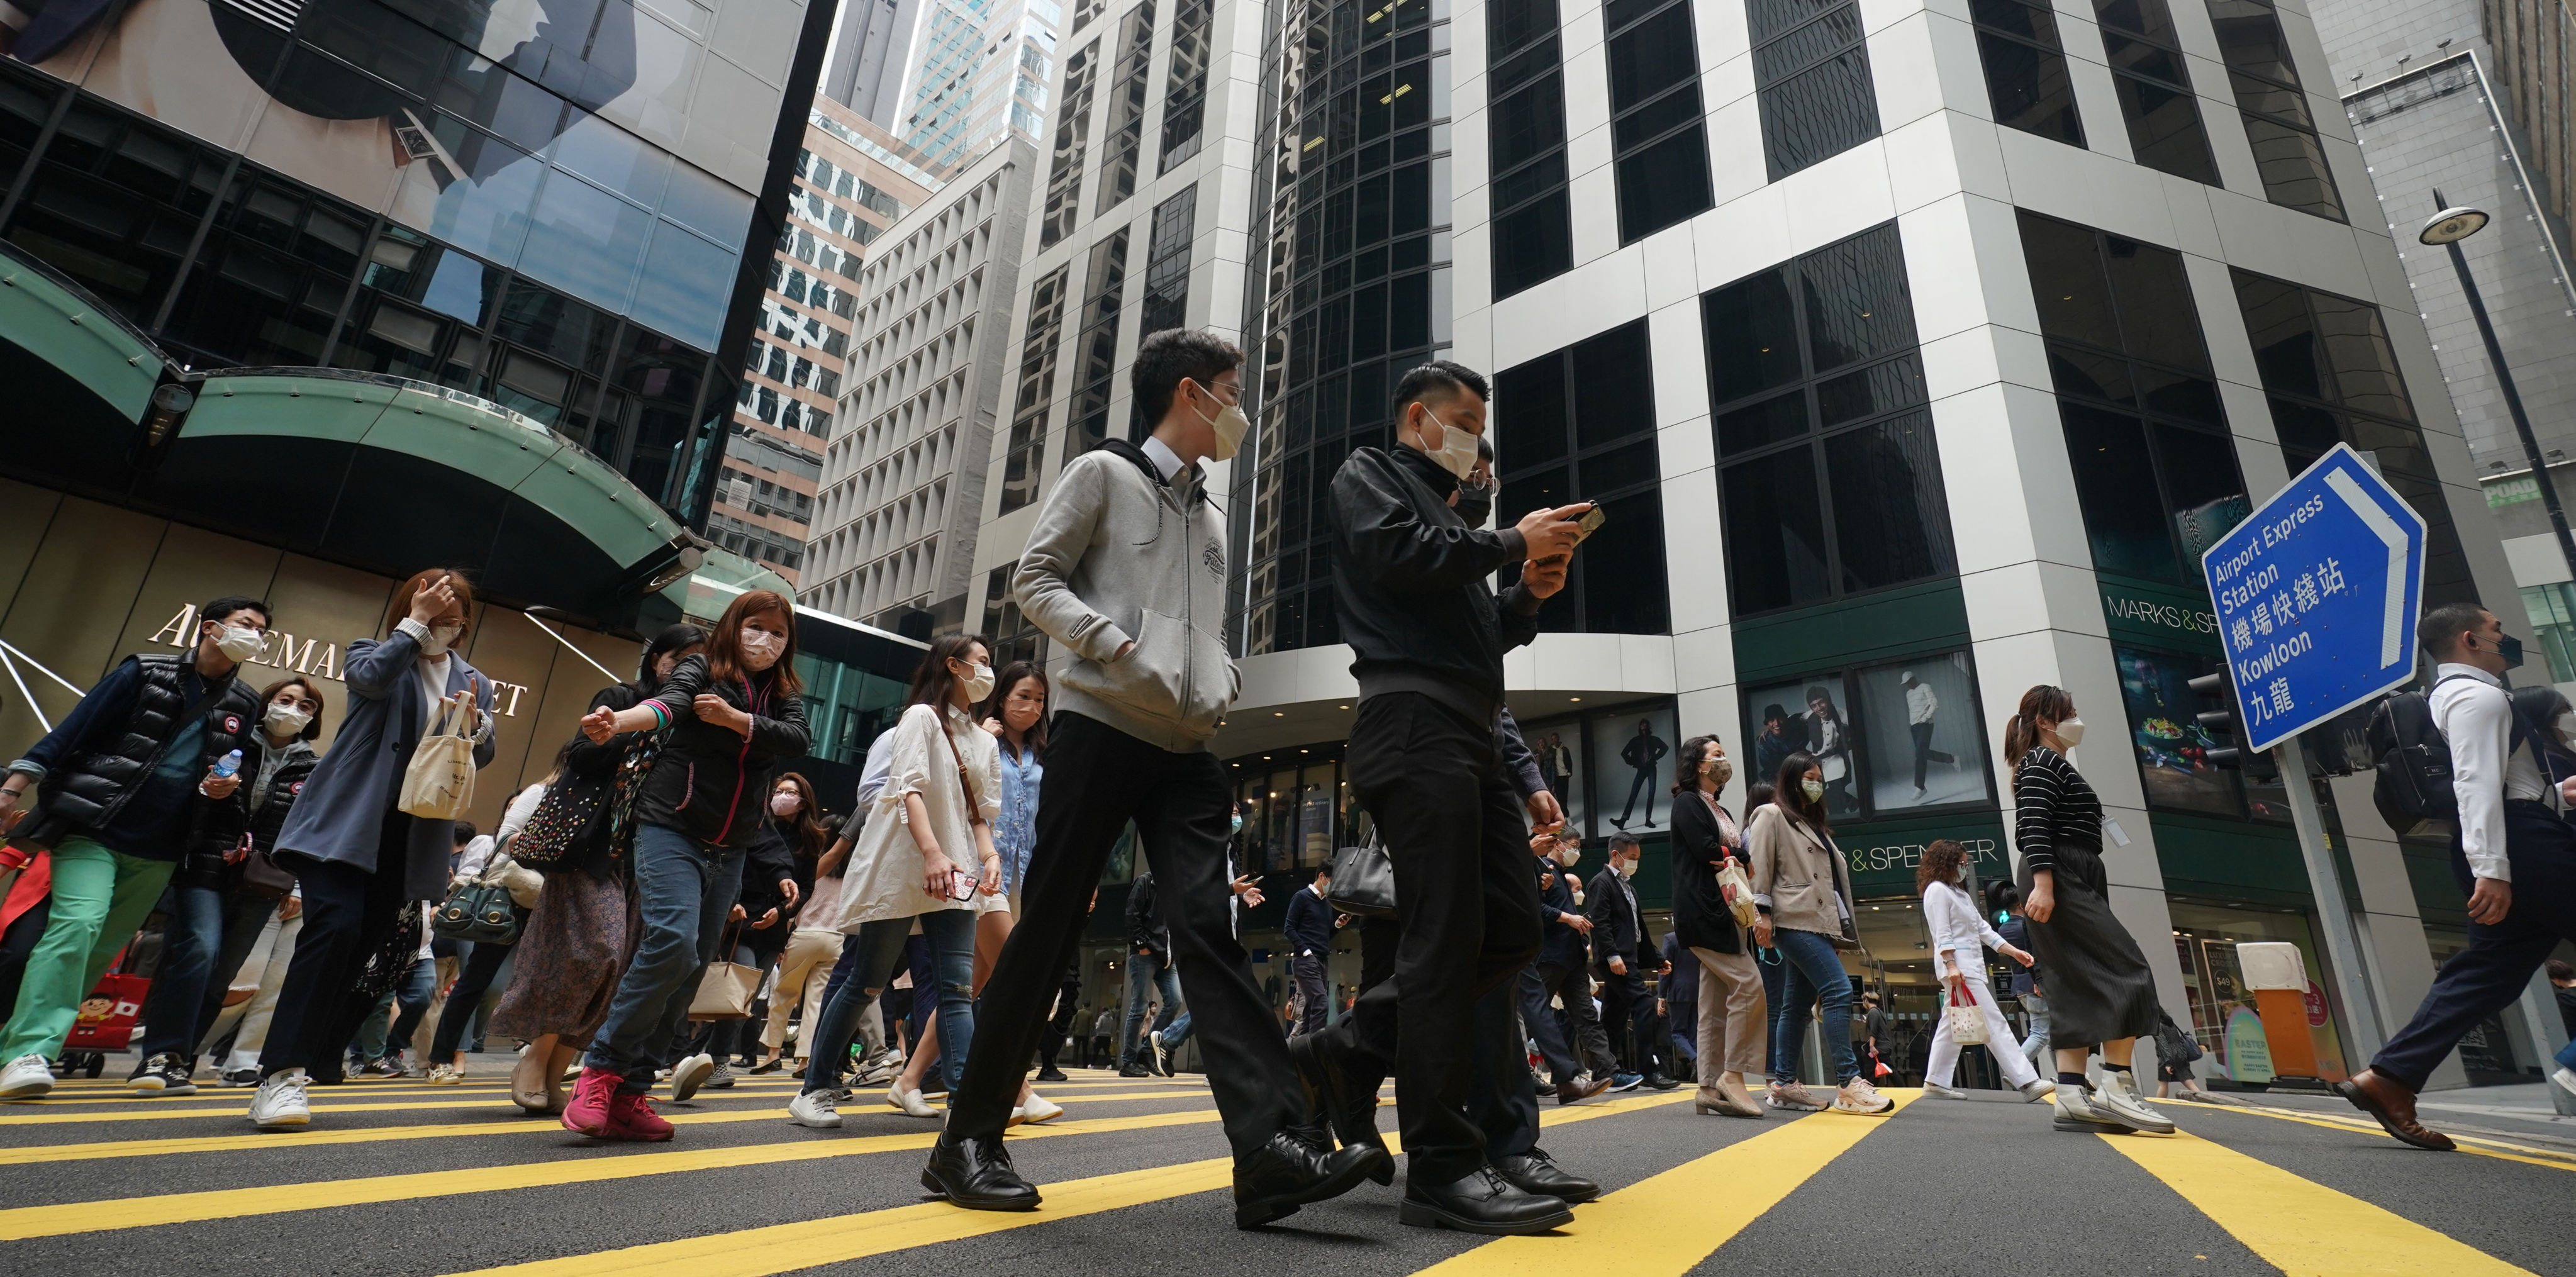 People cross the road in Hong Kong’s Central district on March 30. If we want our workplace to reflect the diversity in society, our hiring practices must keep up. Photo: Felix Wong